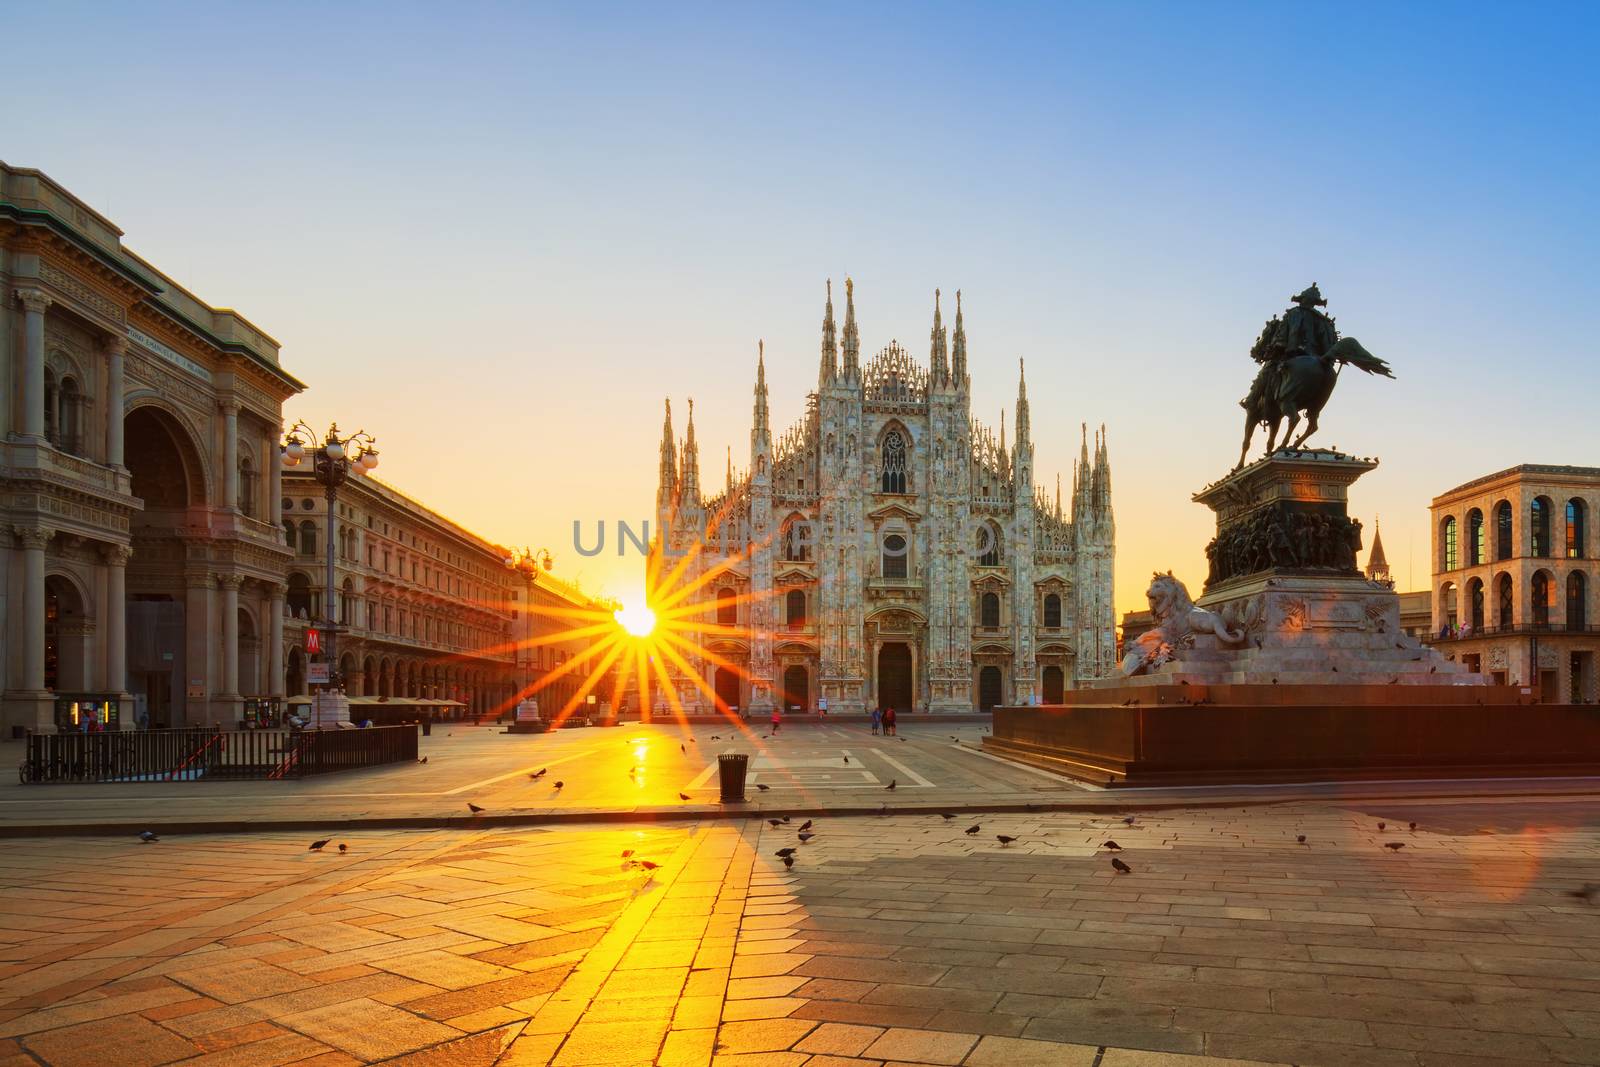 View of Duomo at sunrise by vwalakte